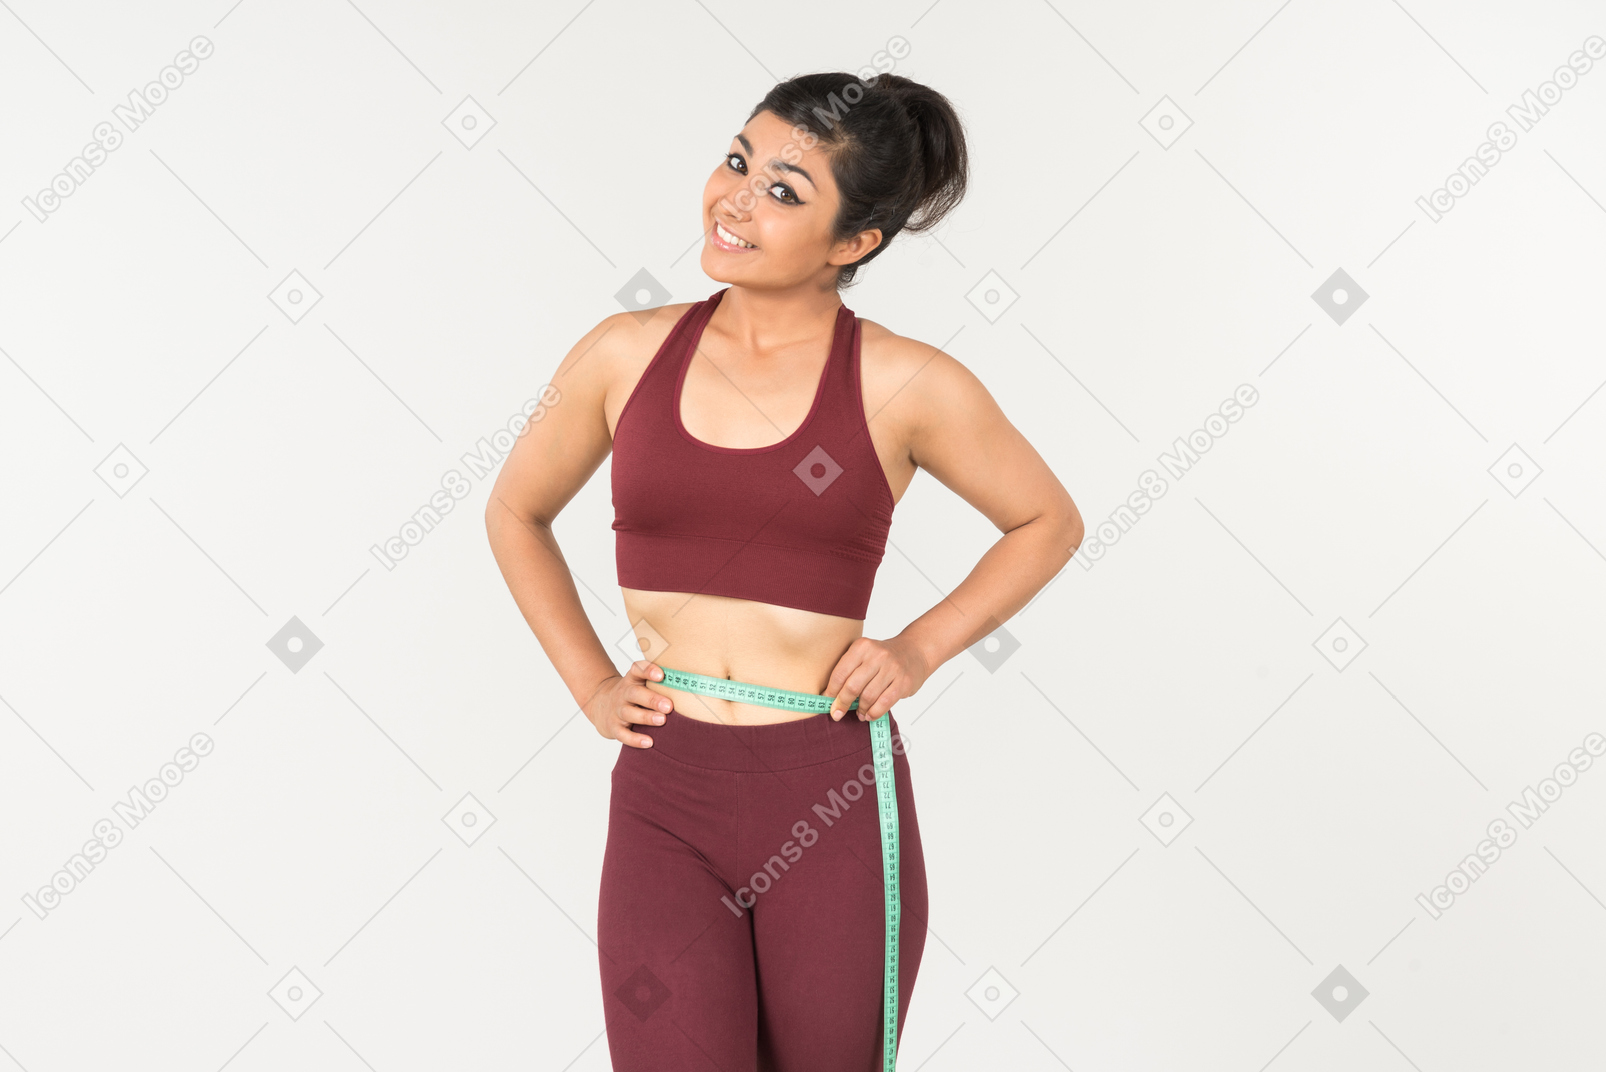 Young indian woman in sporstweat measuring her waist